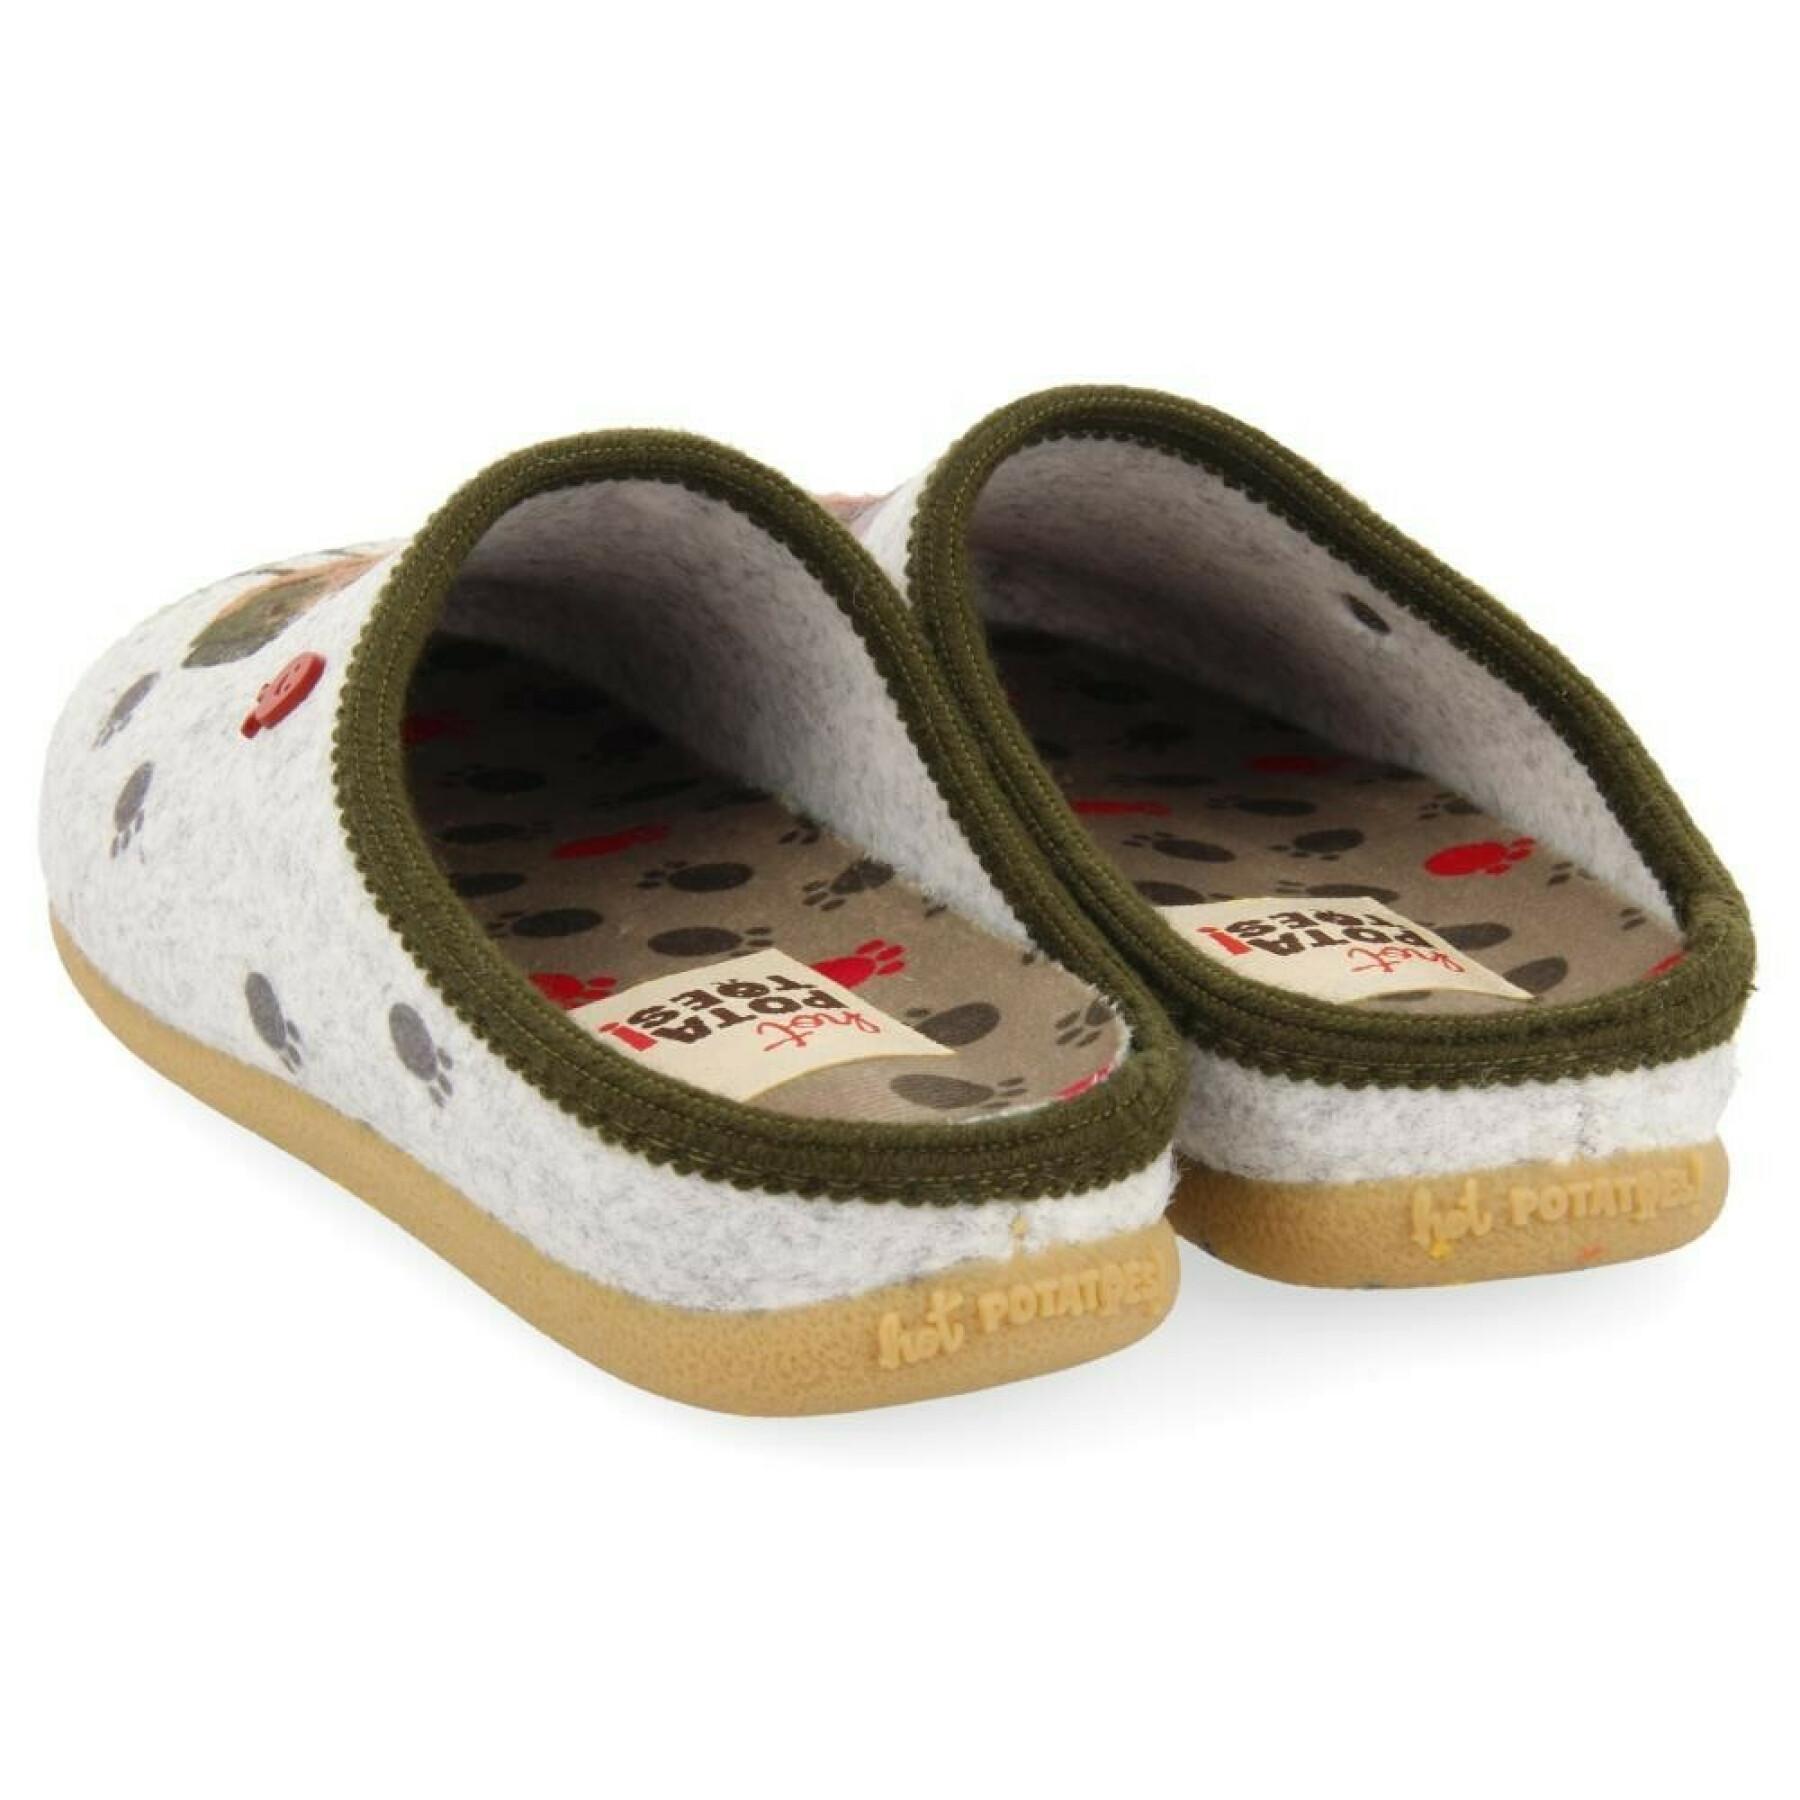 Slippers from the children's collection Hot Potatoes eferding